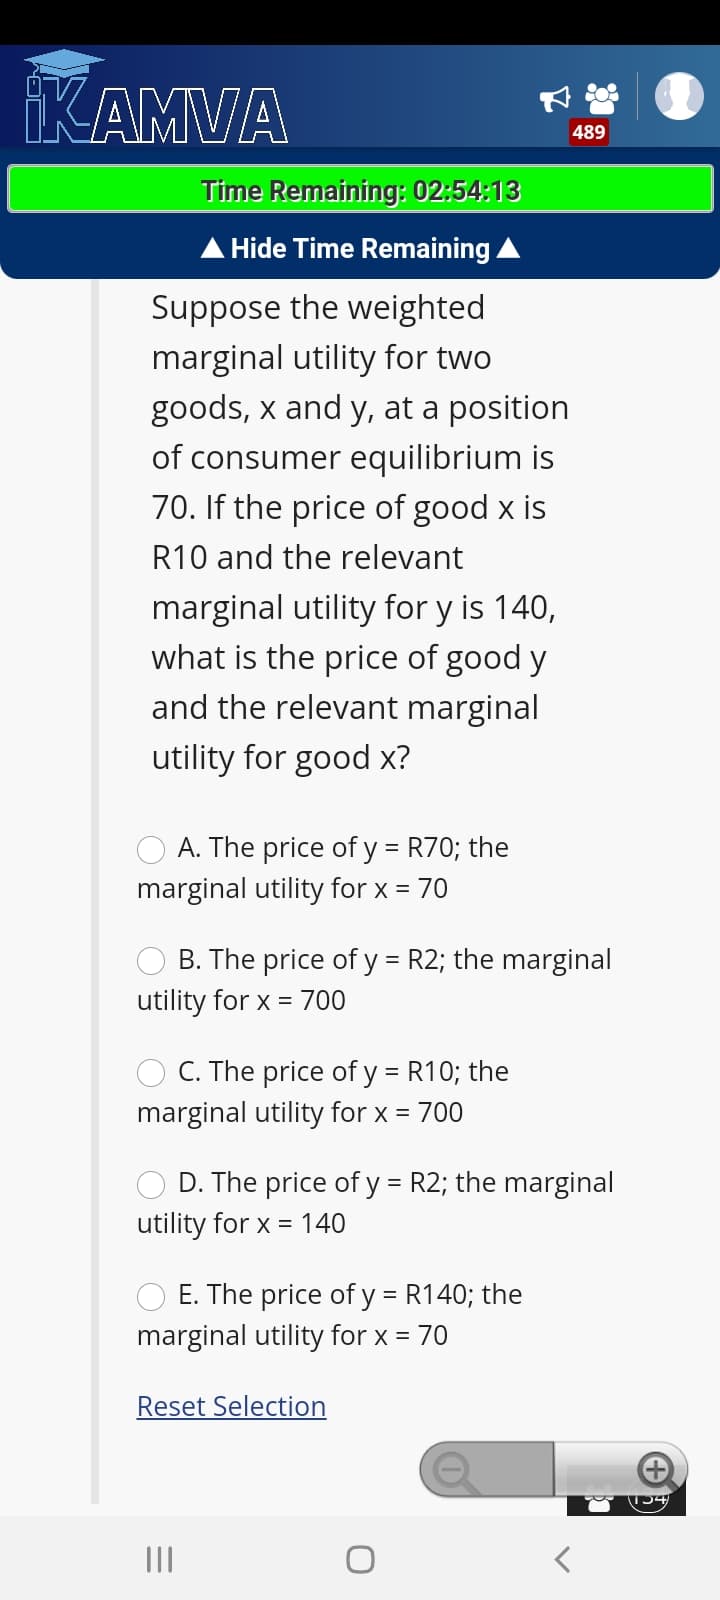 KAMVA
489
Time Remaining: 02:54:13
Hide Time Remaining A
Suppose the weighted
marginal utility for two
goods, x and y, at a position
of consumer equilibrium is
70. If the price of good x is
R10 and the relevant
marginal utility for y is 140,
what is the price of good y
and the relevant marginal
utility for good x?
A. The price of y = R70; the
marginal utility for x = 70
%3D
B. The price of y = R2; the marginal
utility for x =
700
C. The price of y = R10; the
marginal utility for x = 700
D. The price of y = R2; the marginal
utility for x = 140
E. The price of y = R140; the
marginal utility for x = 70
Reset Selection
|54
II
